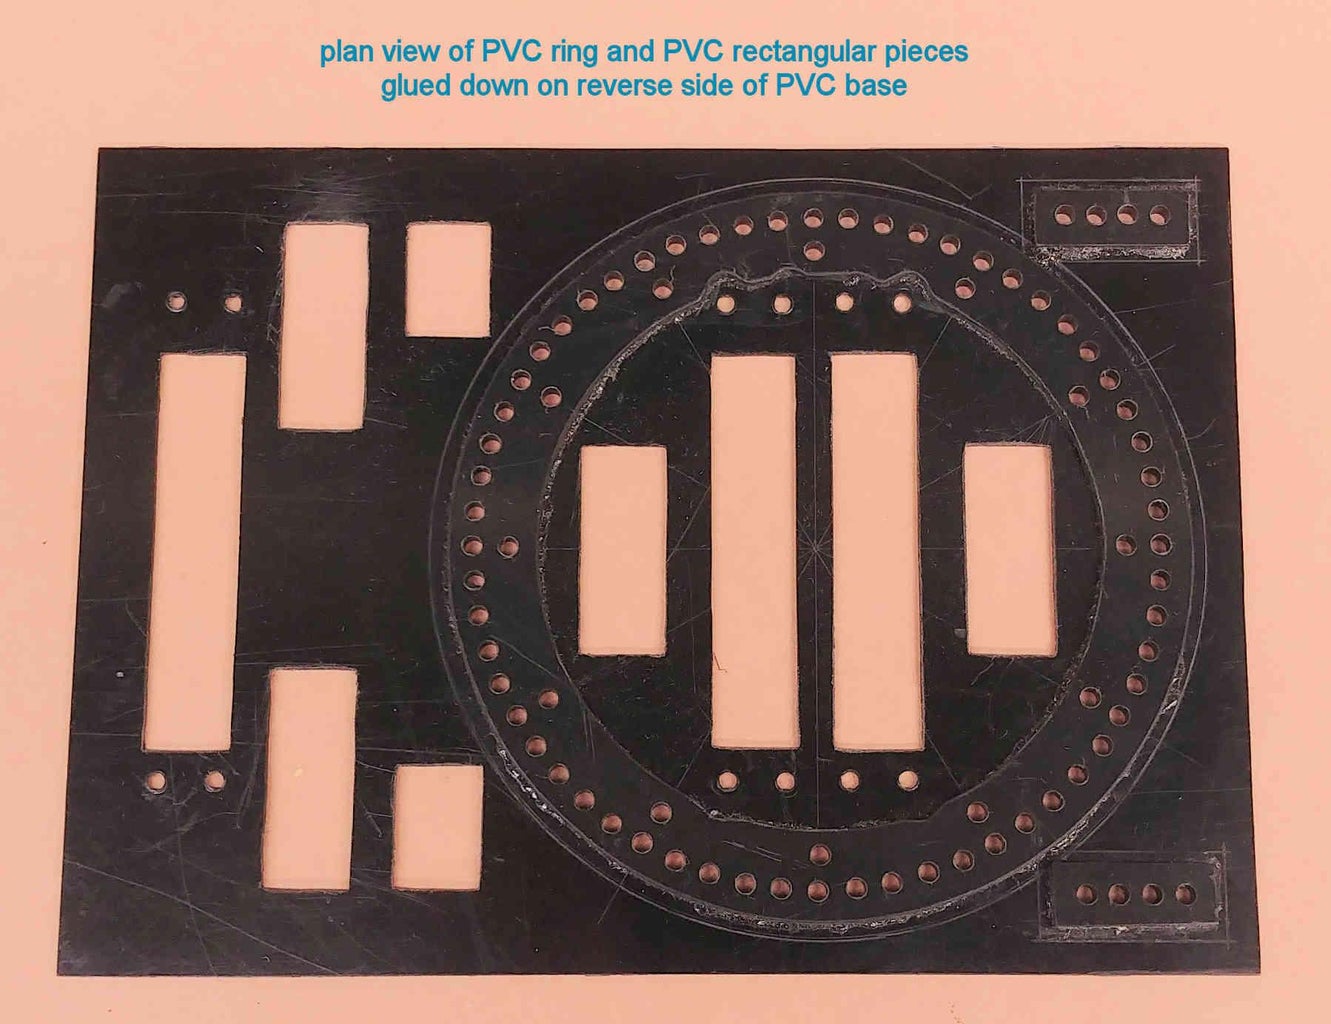 Stage 2 of PVC Base Modification